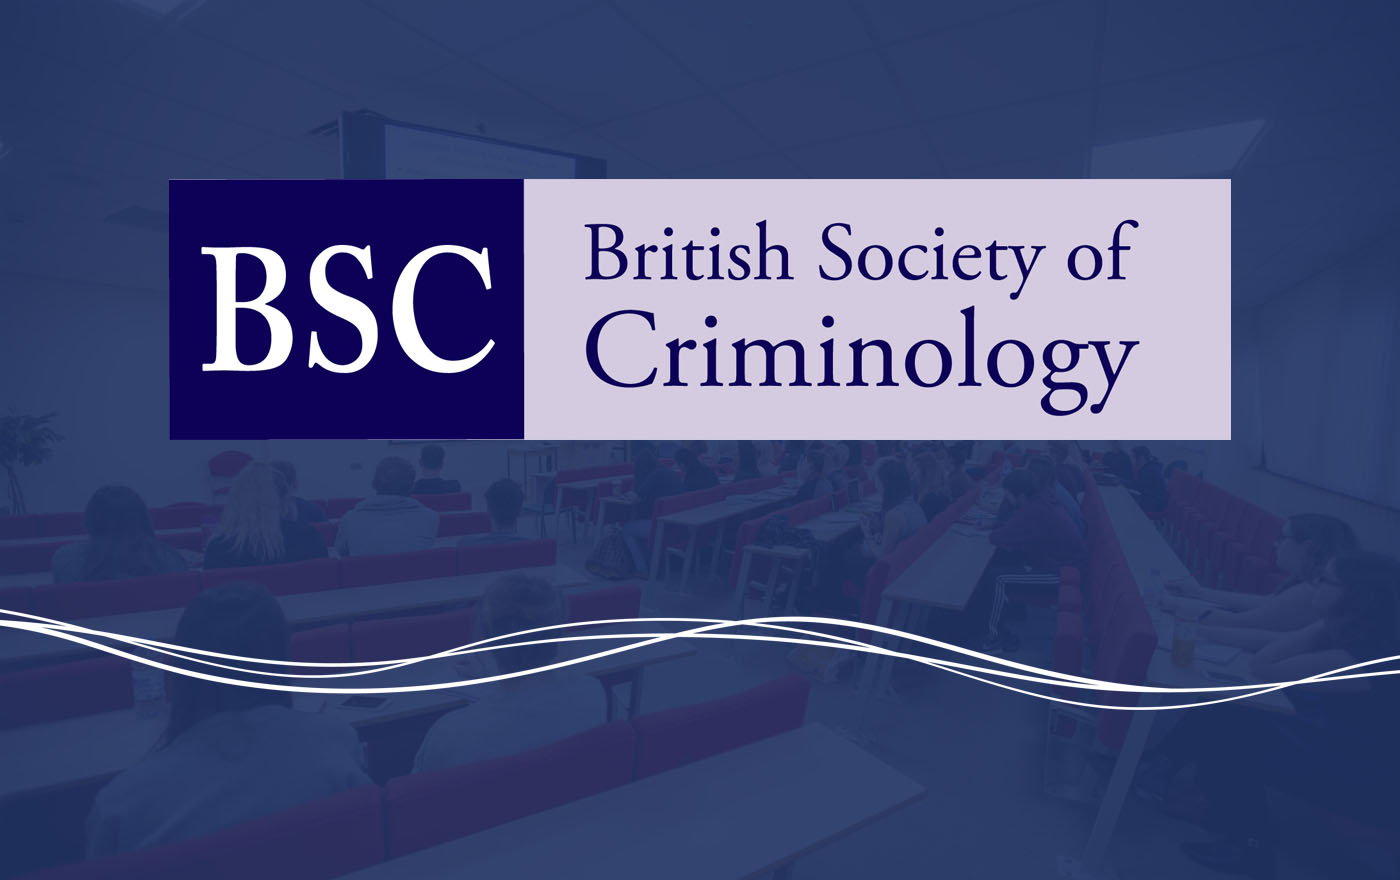 Department of Criminology wins British Society of Criminology (BSC) National Award for Excellence in Teaching Criminology